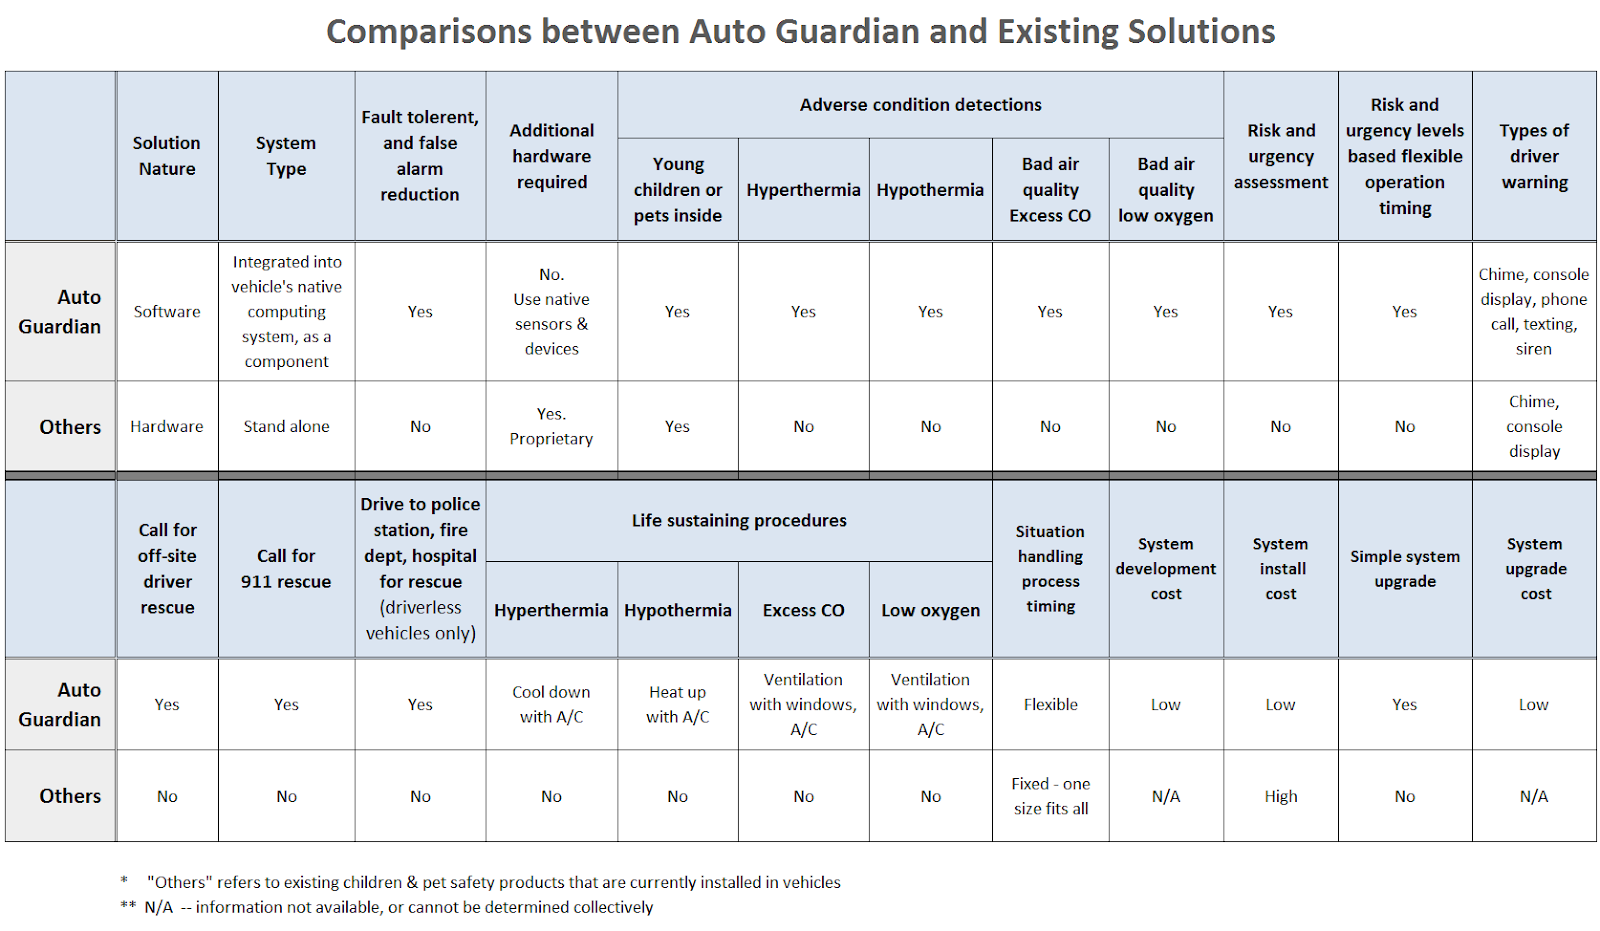 D:\Jorp\BabyAlarm\Business\Marketing Material\Comparisons between Auto Guardian and Other Solutions.png